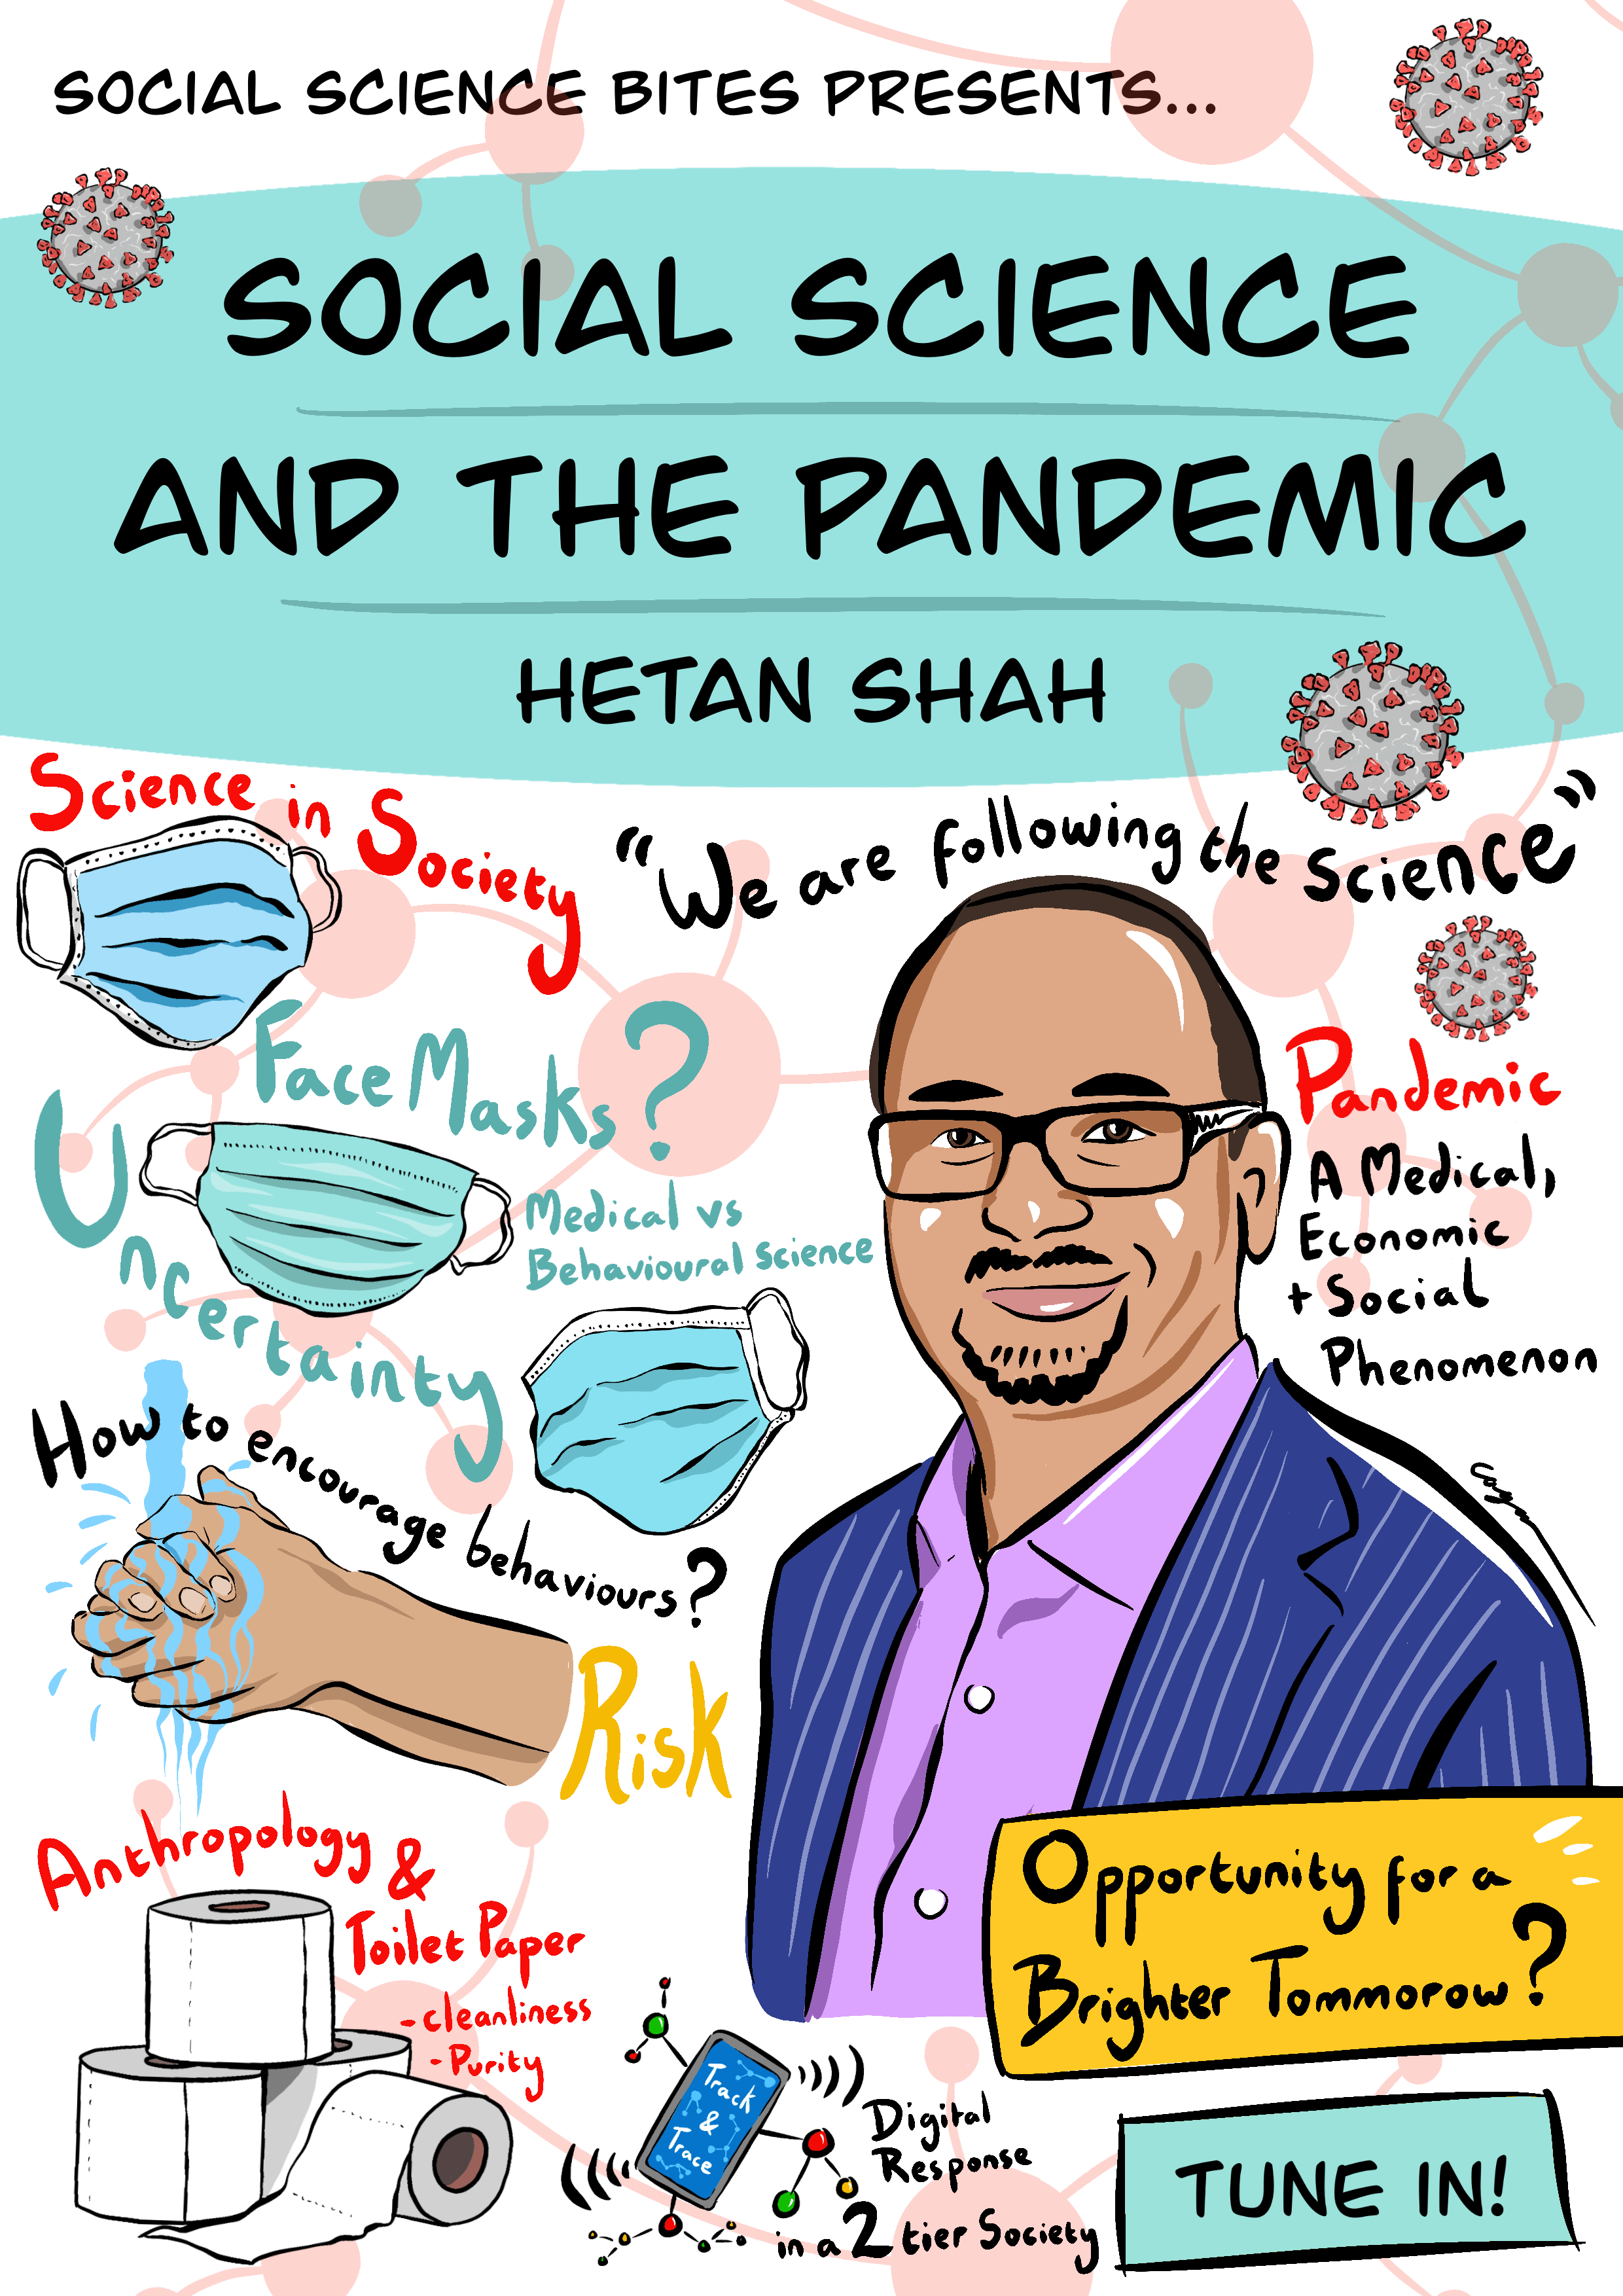 Illustration of Hetan Shah on Social Science and the Covid-19 pandemic